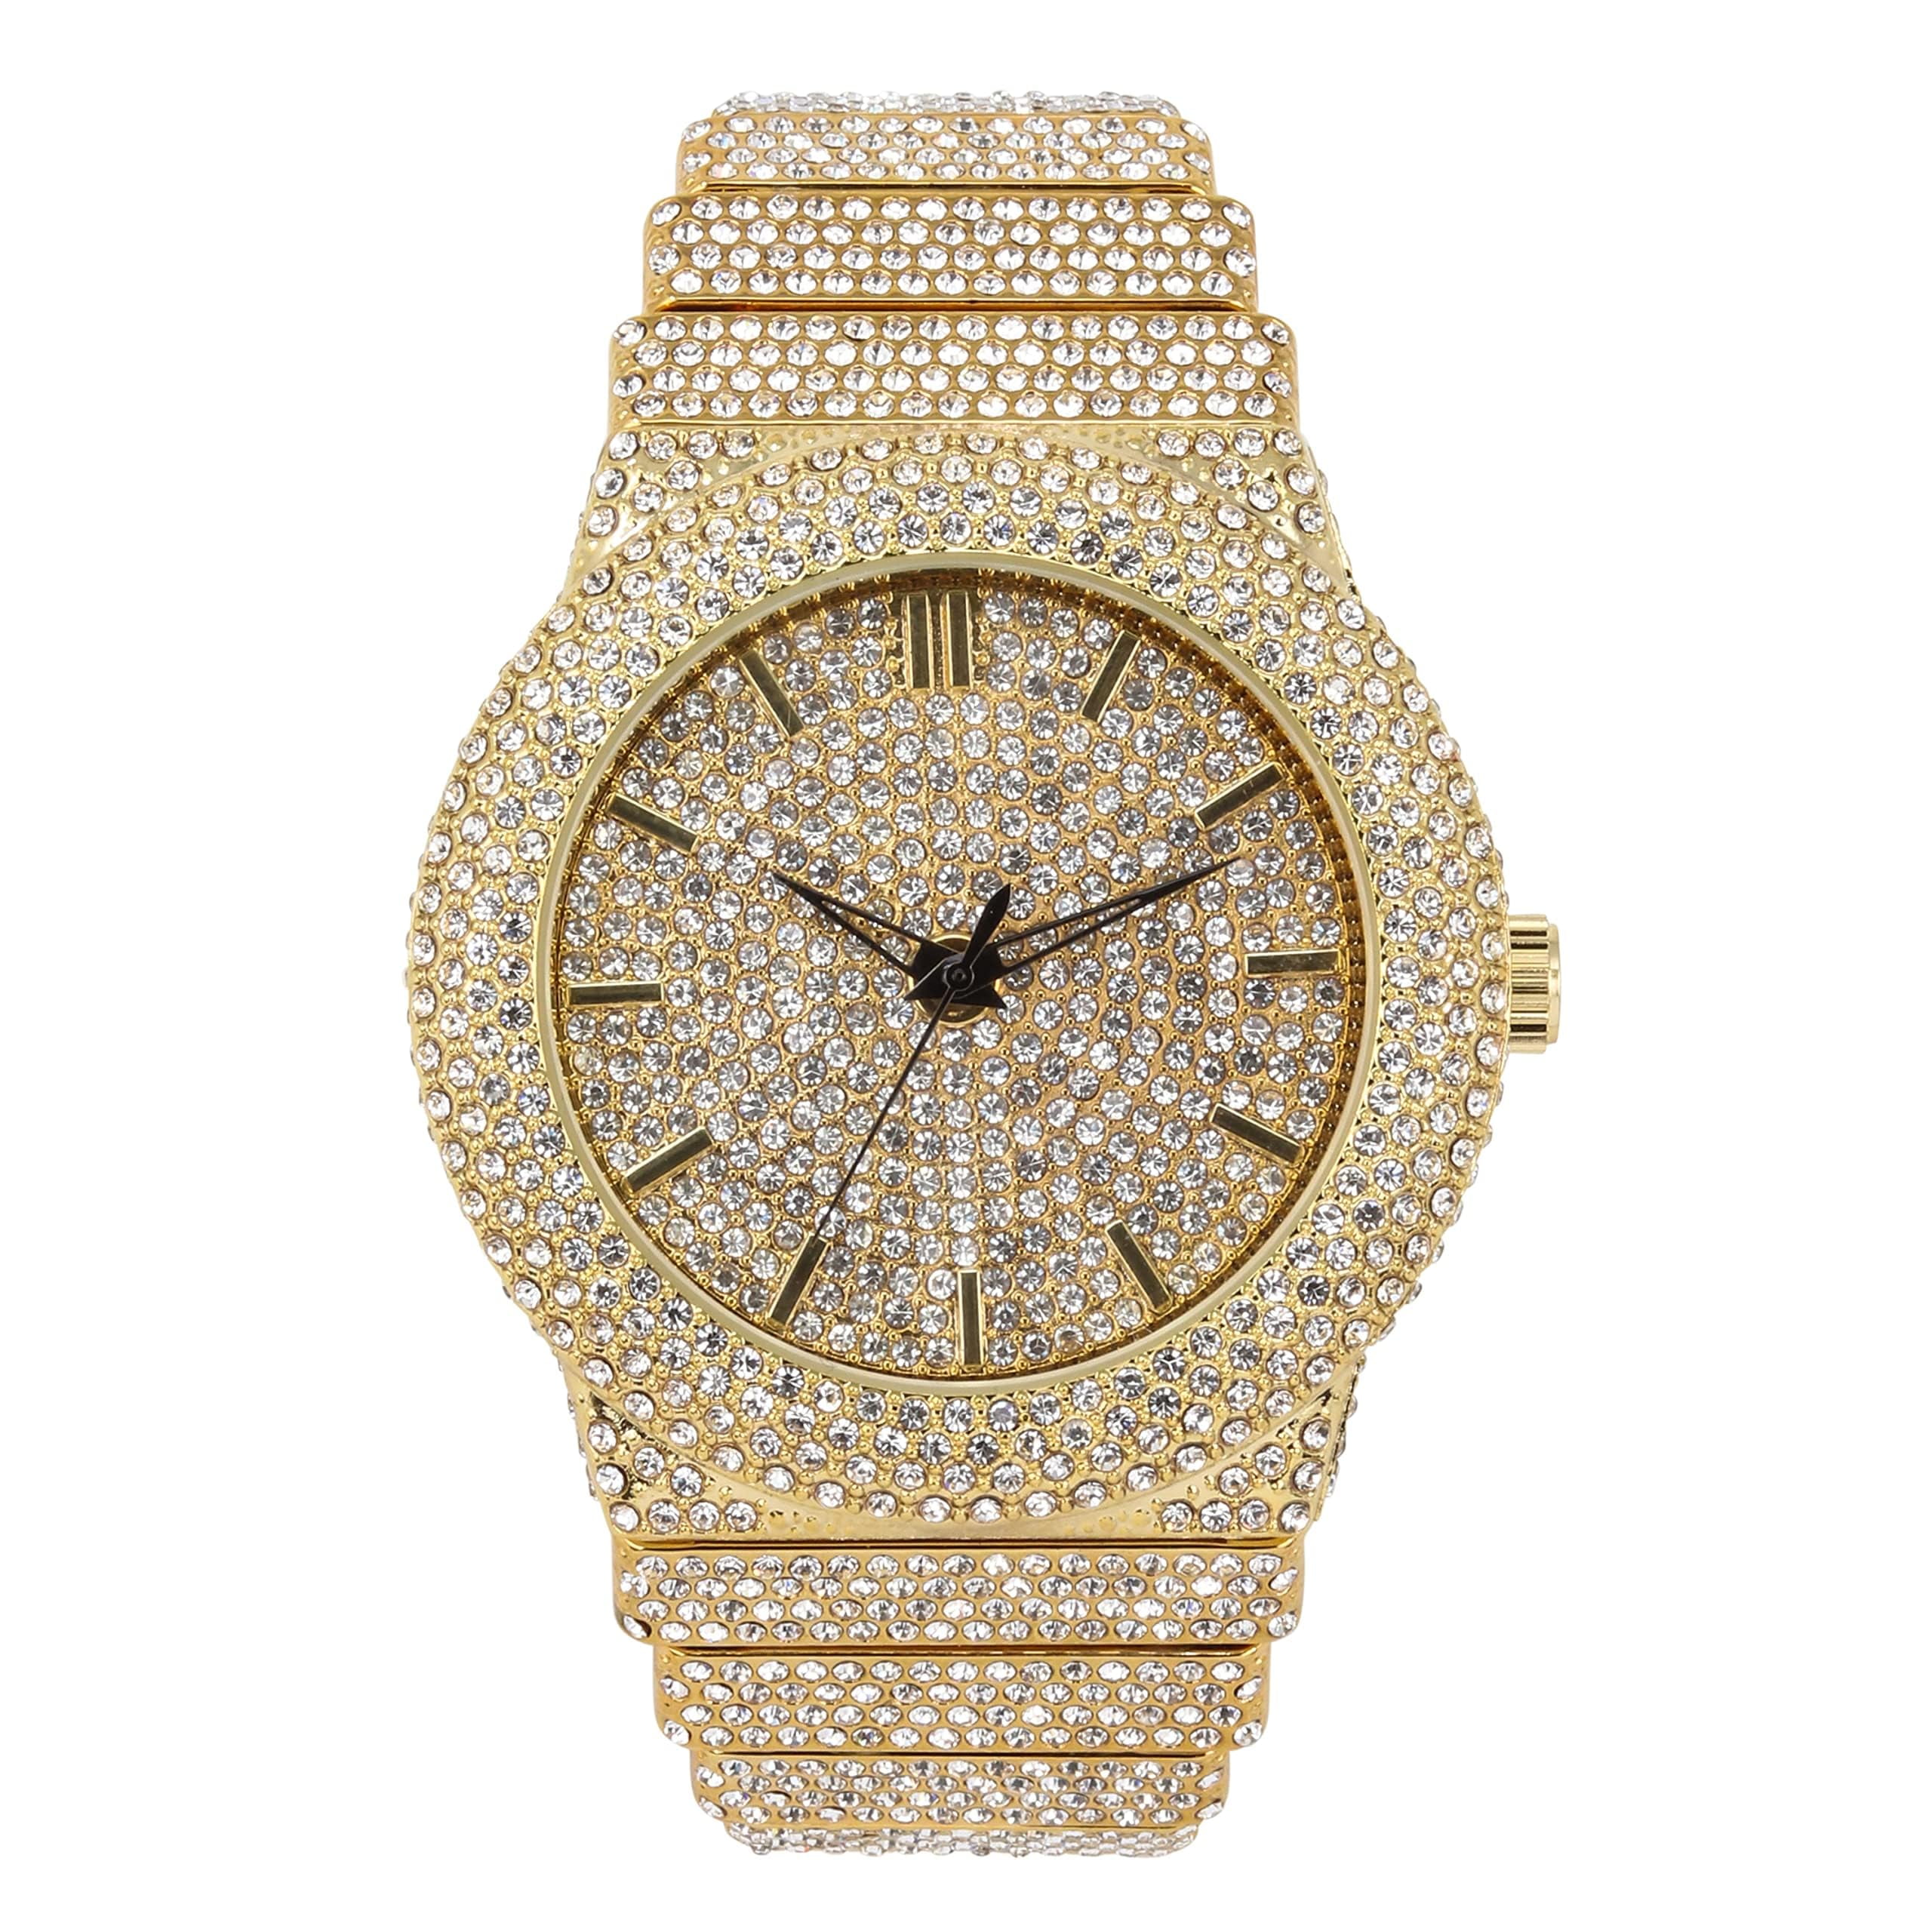 Men's Round Iced Out Diamond Watch - Brilliant Crystals, Bling Dial ...